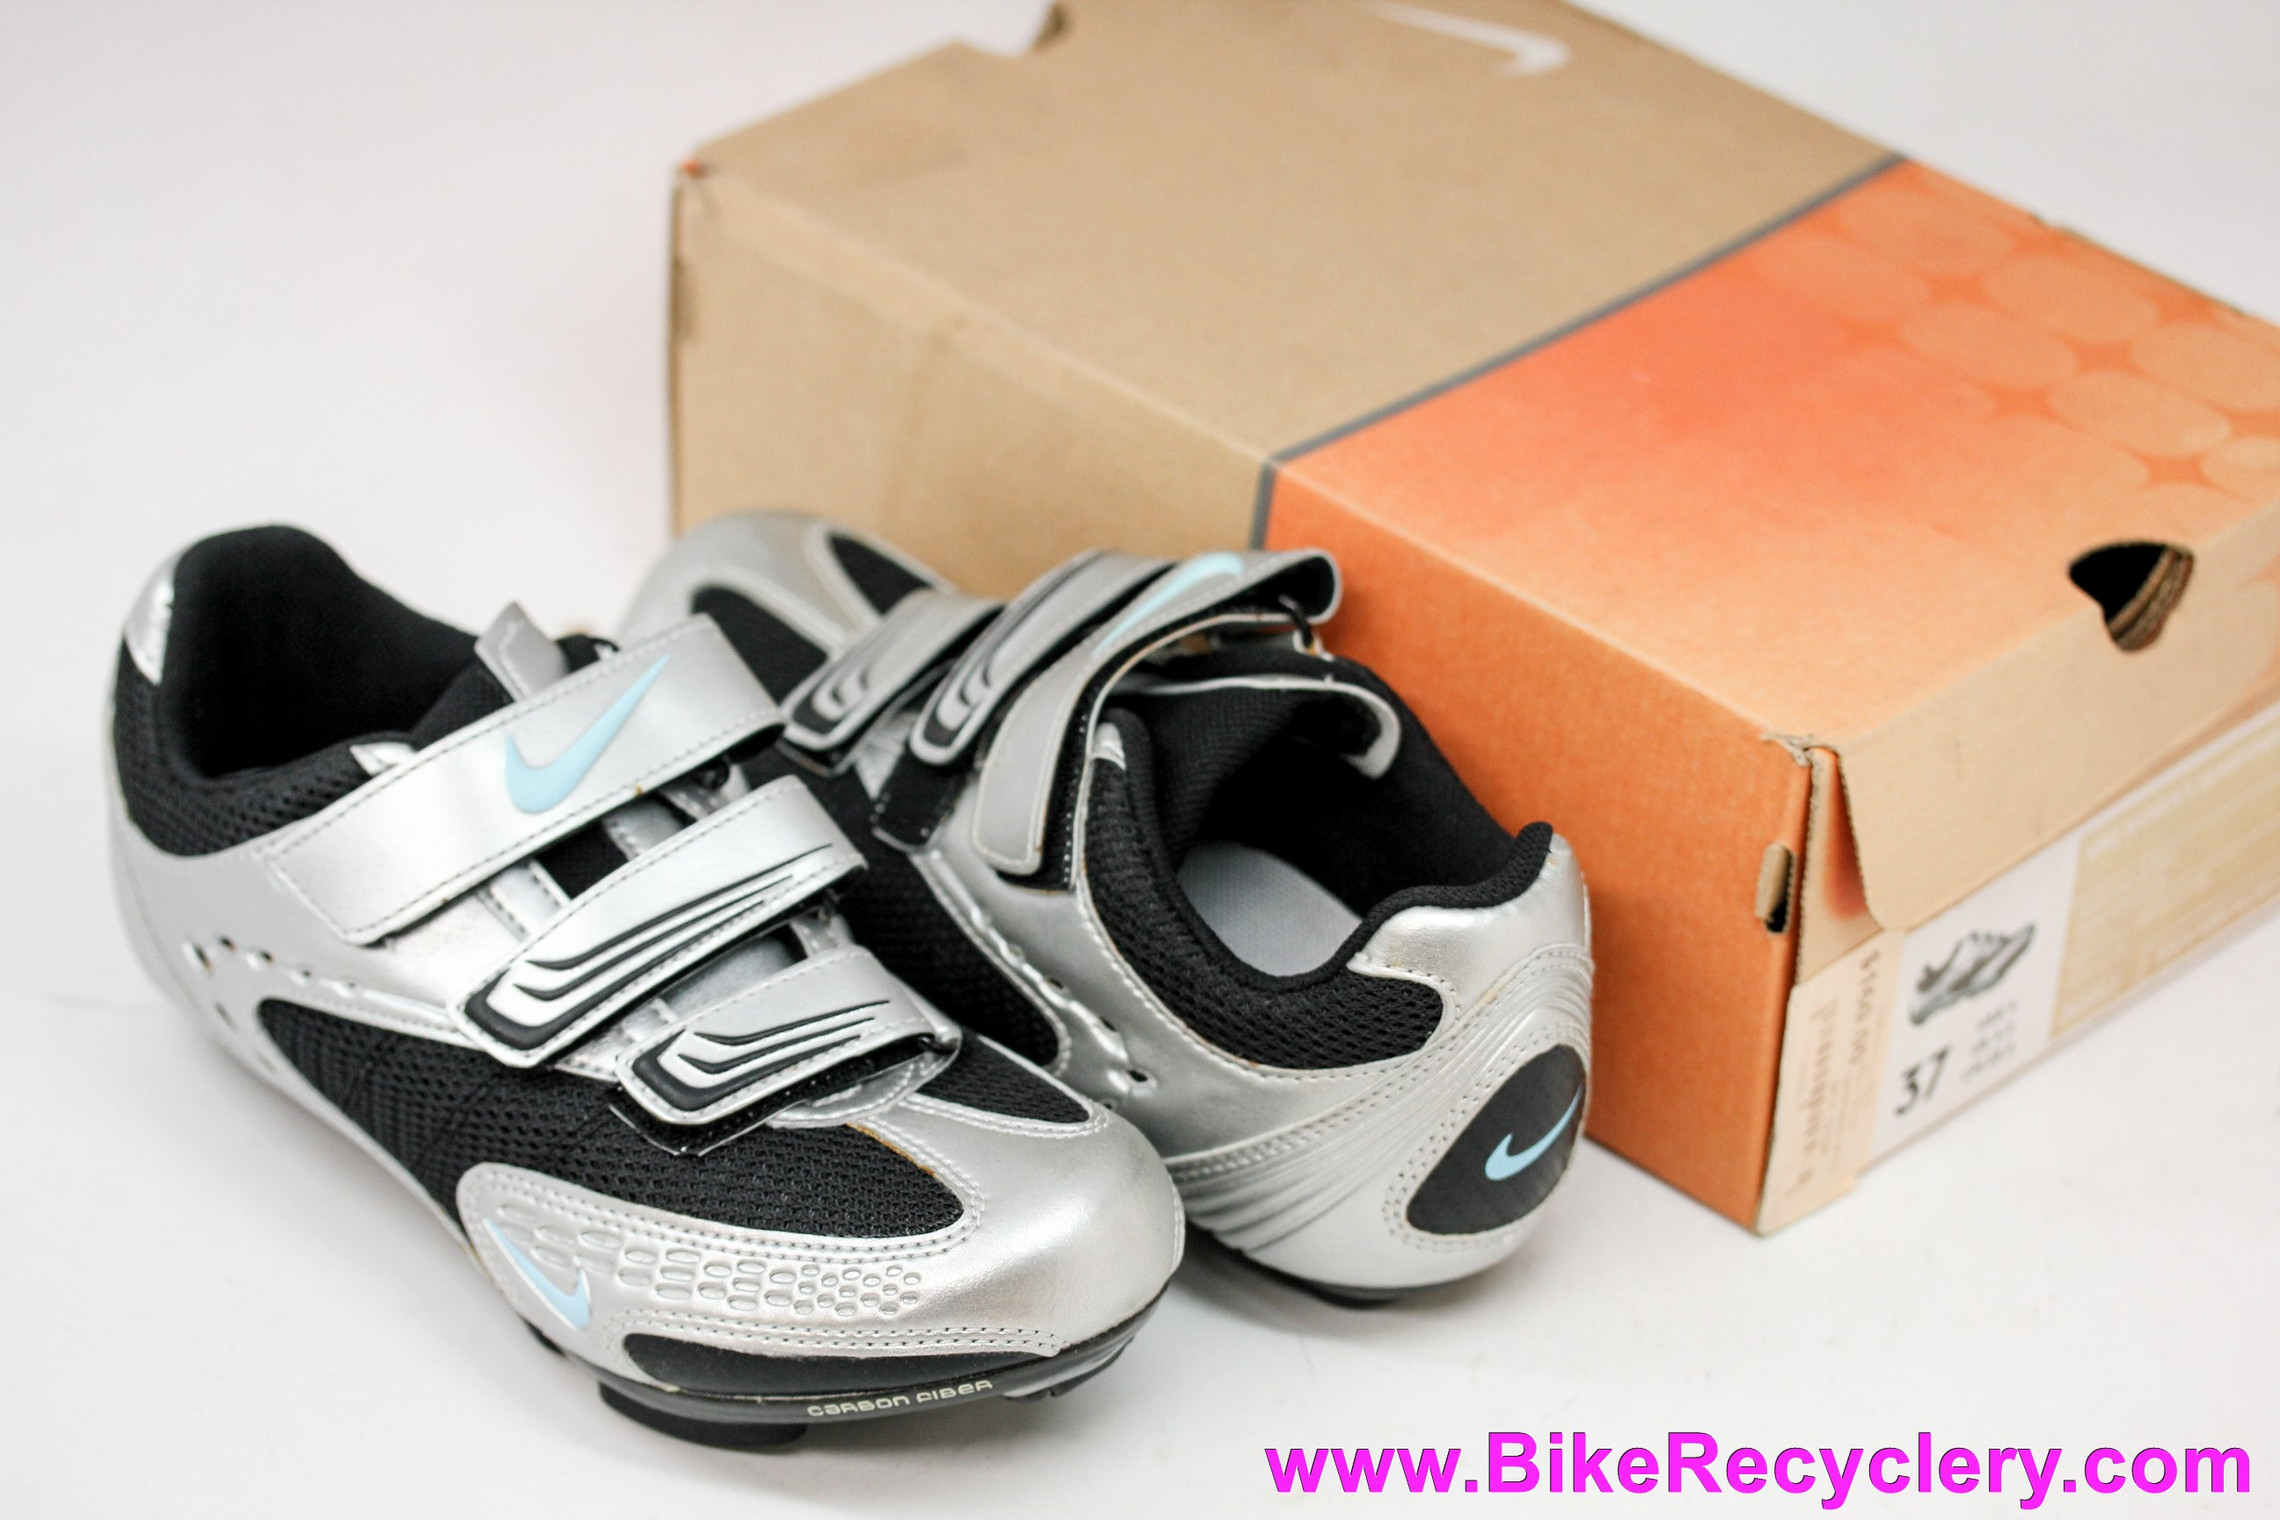 Nike Granfondo WRX Carbon Womens Road Cycling Shoes Size 37EU - Two and 3 Bolt Cleats - Walkable - Grey/Black (NEW w/stains)